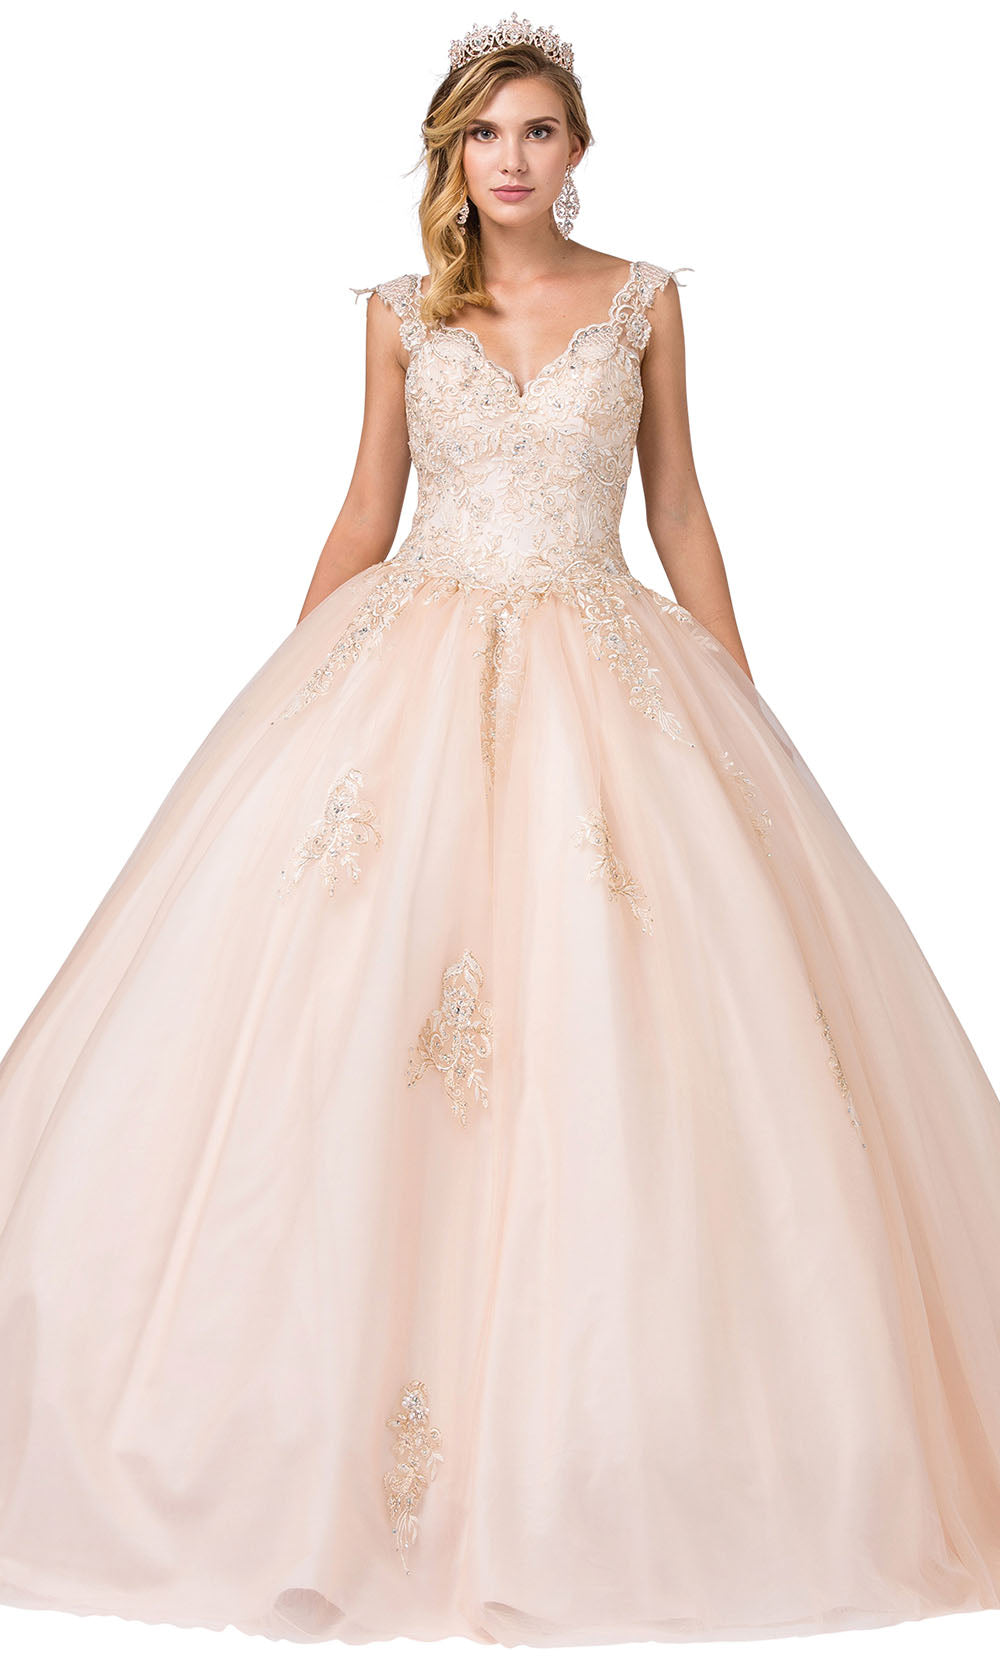 Dancing Queen - 1287 Cap Sleeve Embroidered Ballgown In Champagne & Gold